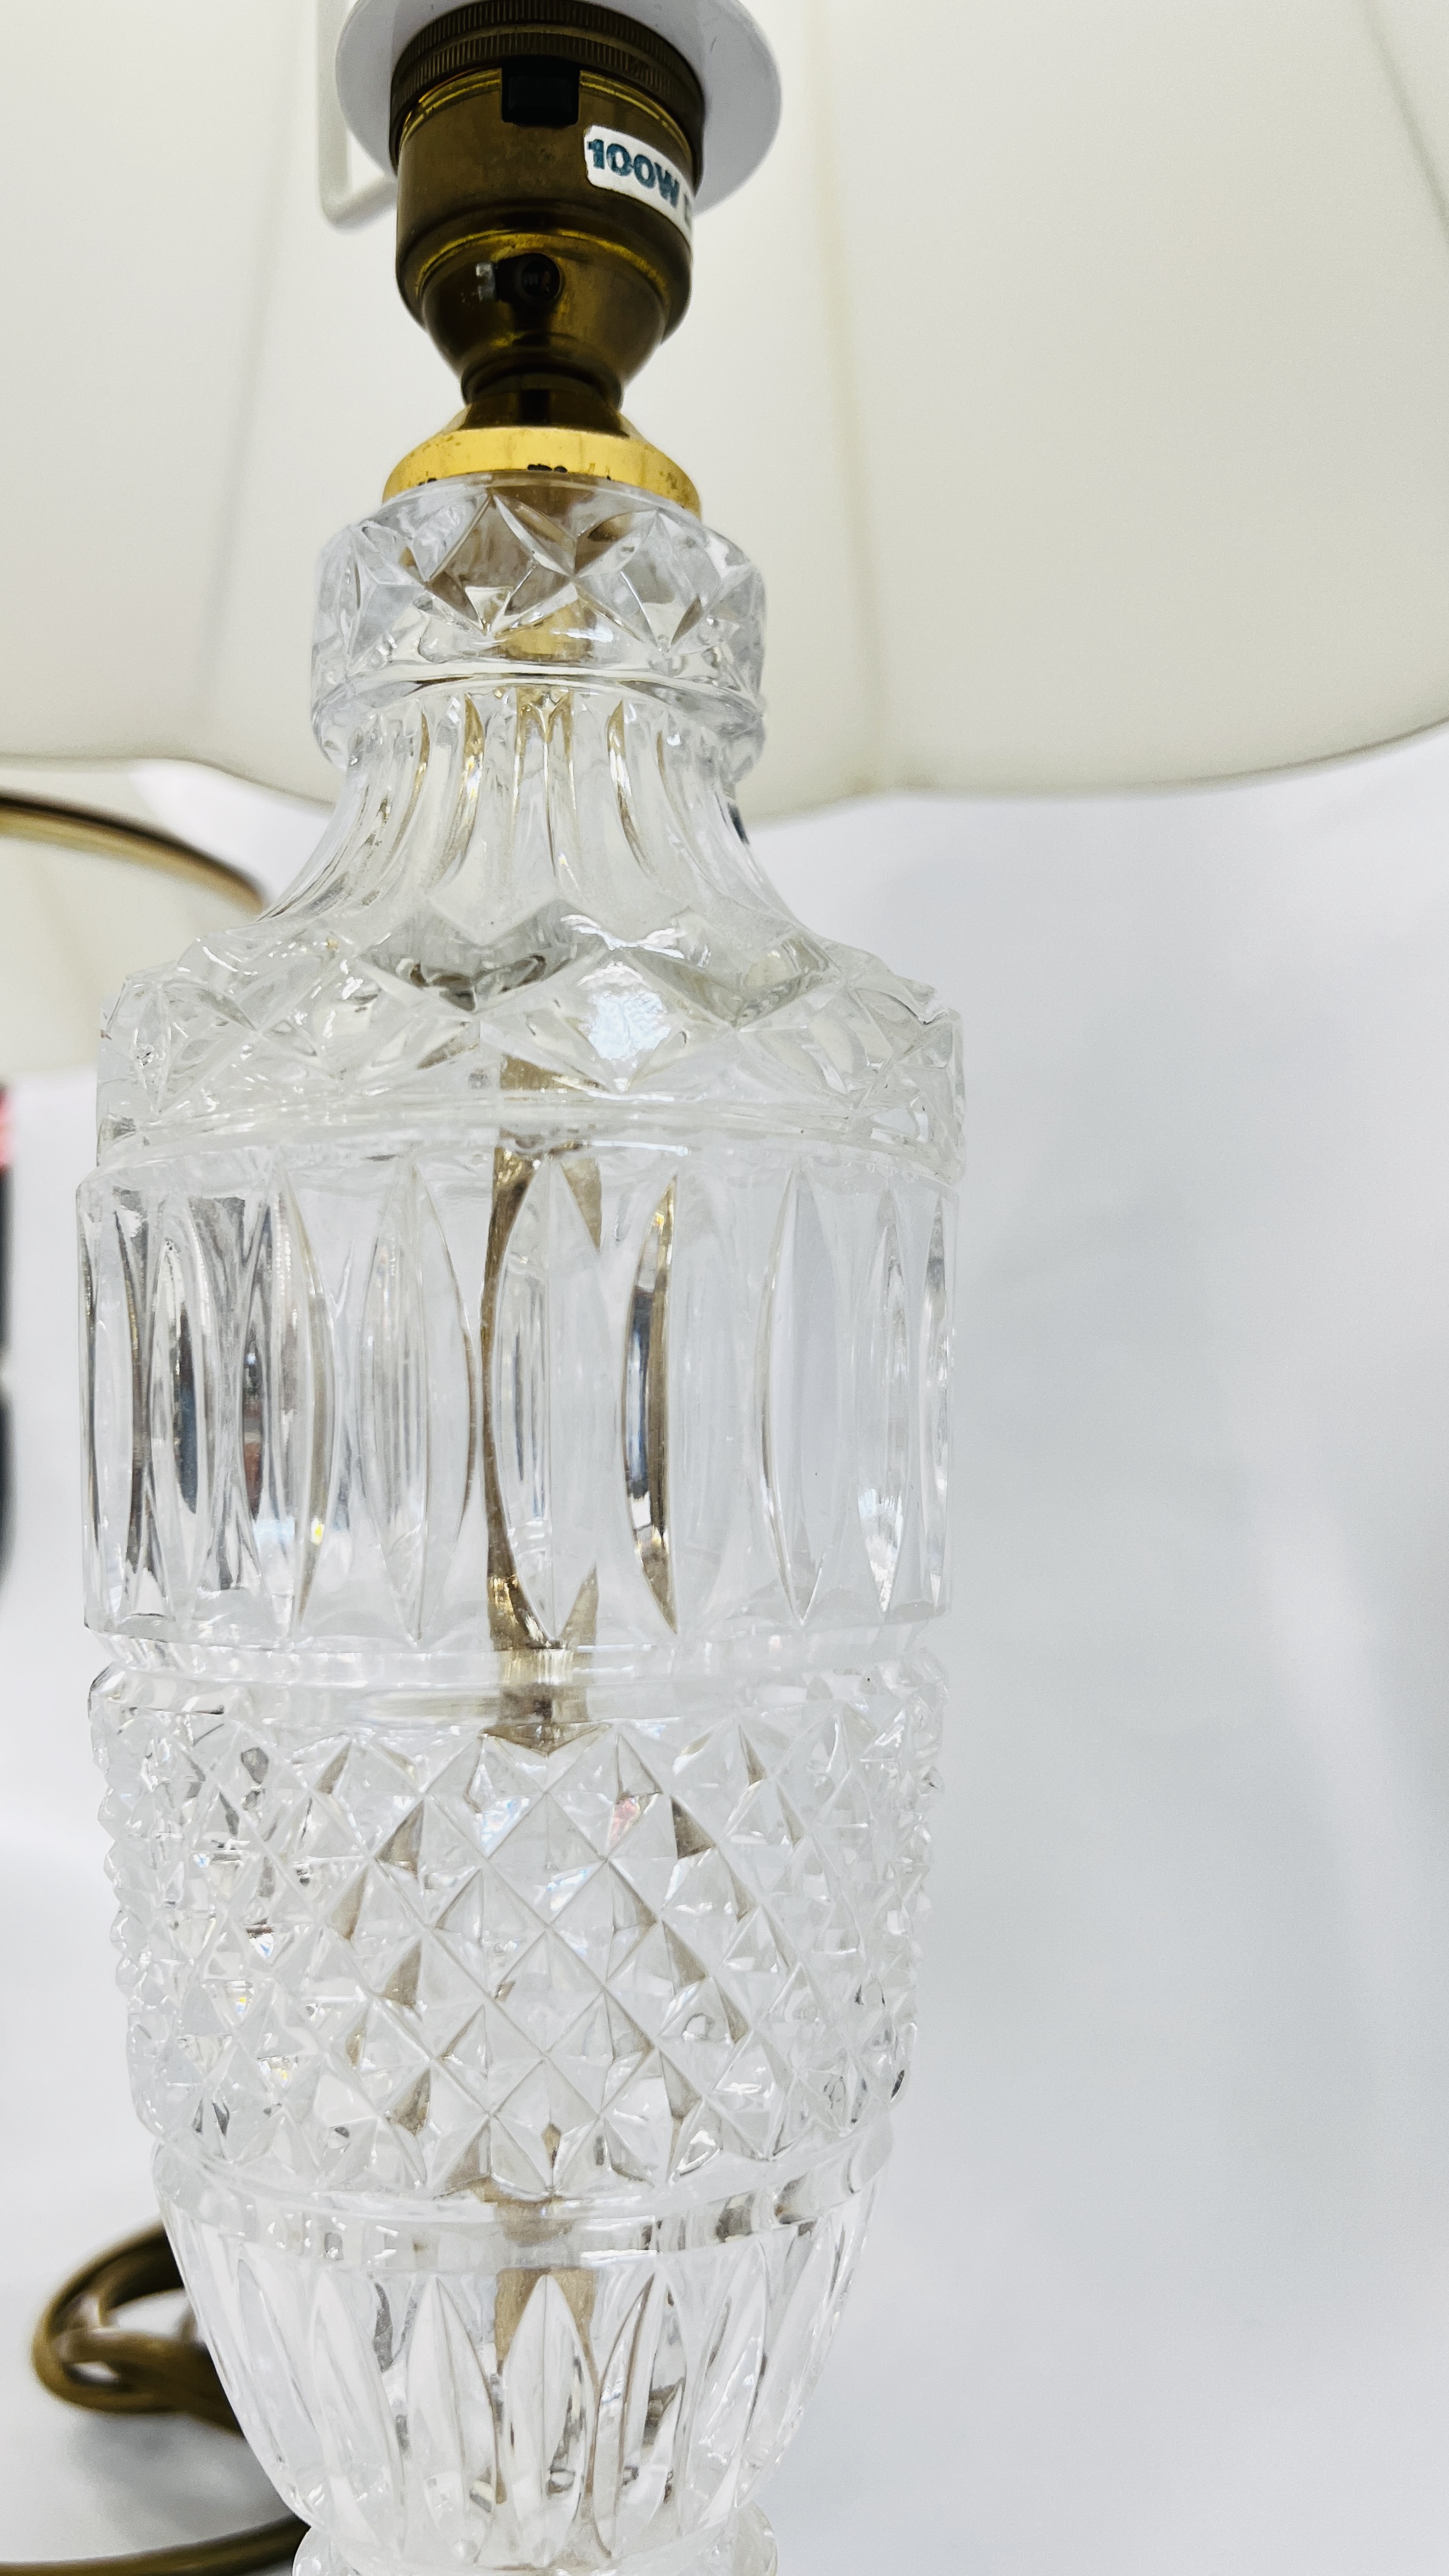 PAIR OF LEAD CRYSTAL TABLE LAMPS WITH CREAM SHADES, OVERALL HEIGHT 58CM - SOLD AS SEEN. - Image 6 of 6